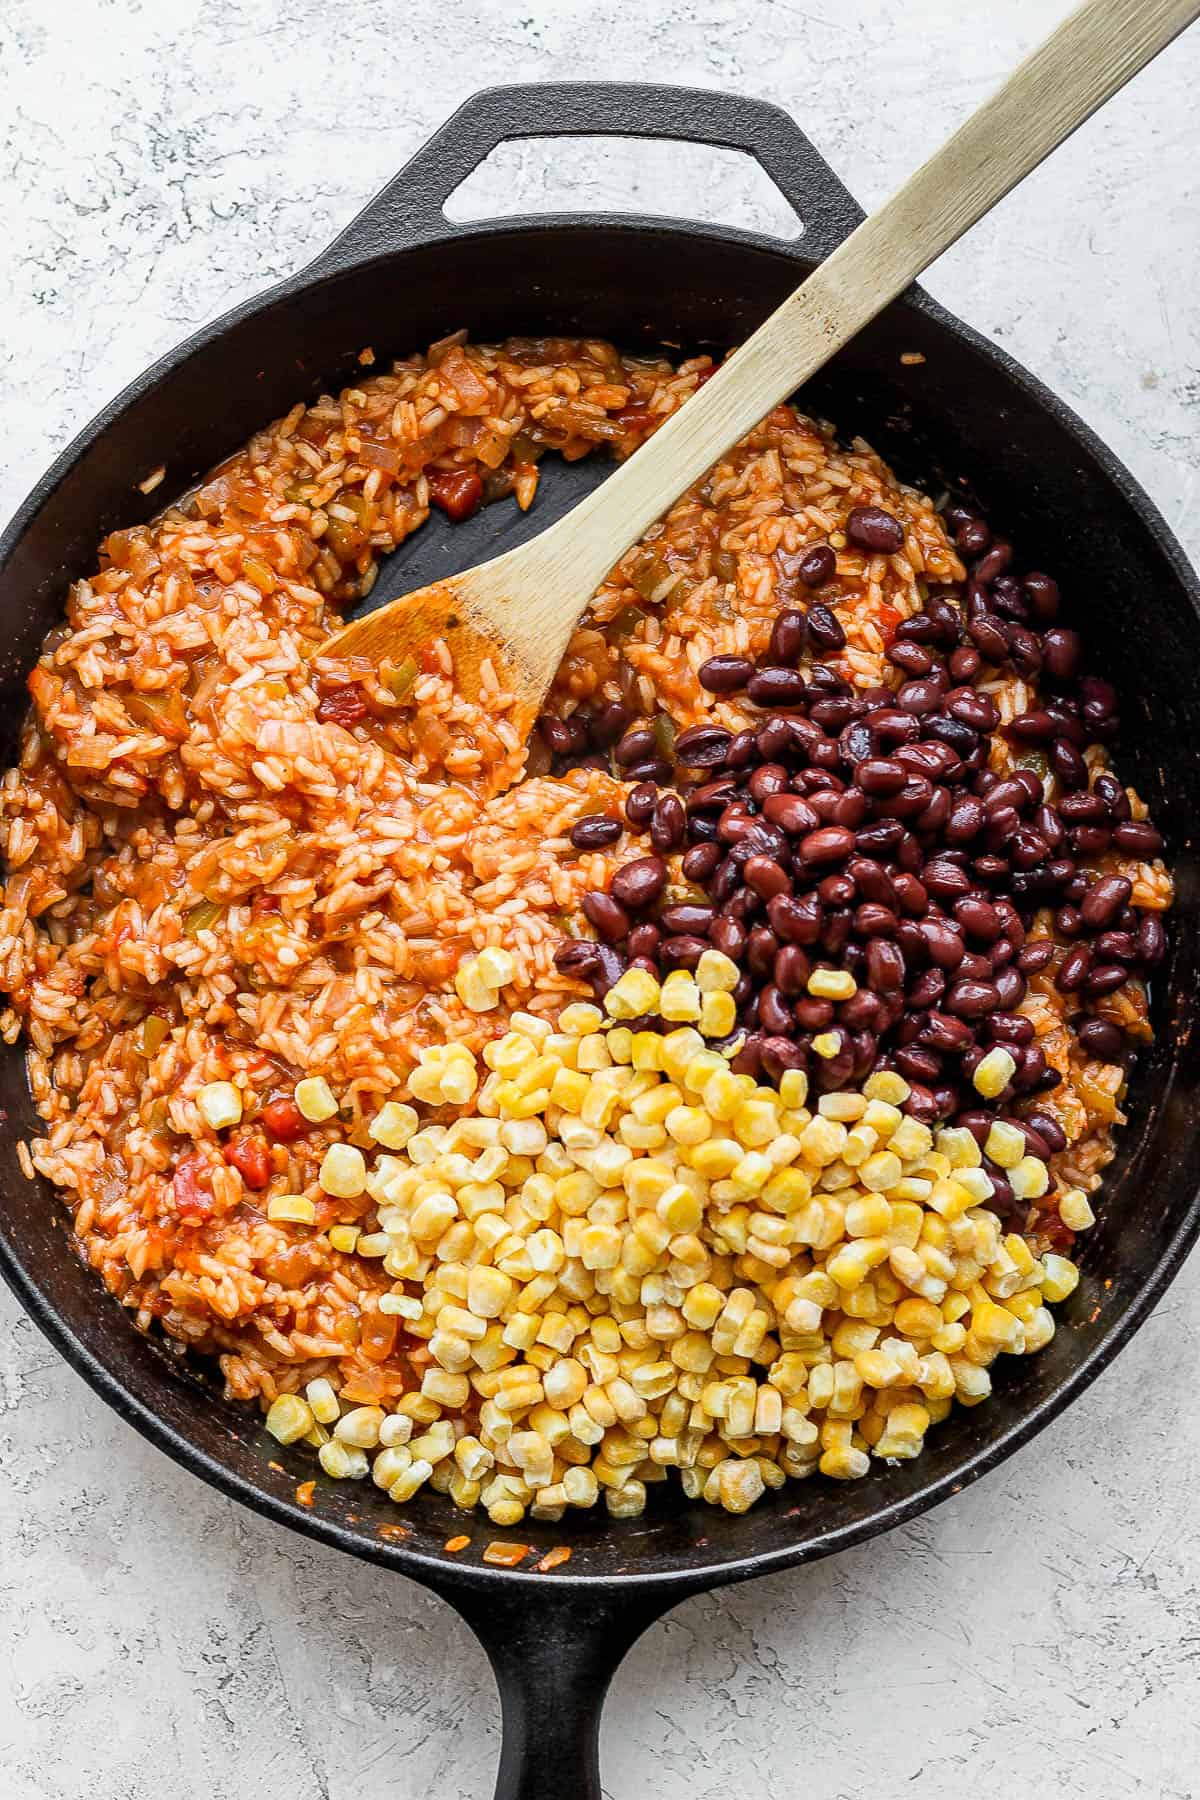 Fully cooked salsa rice with beans and corn being added.